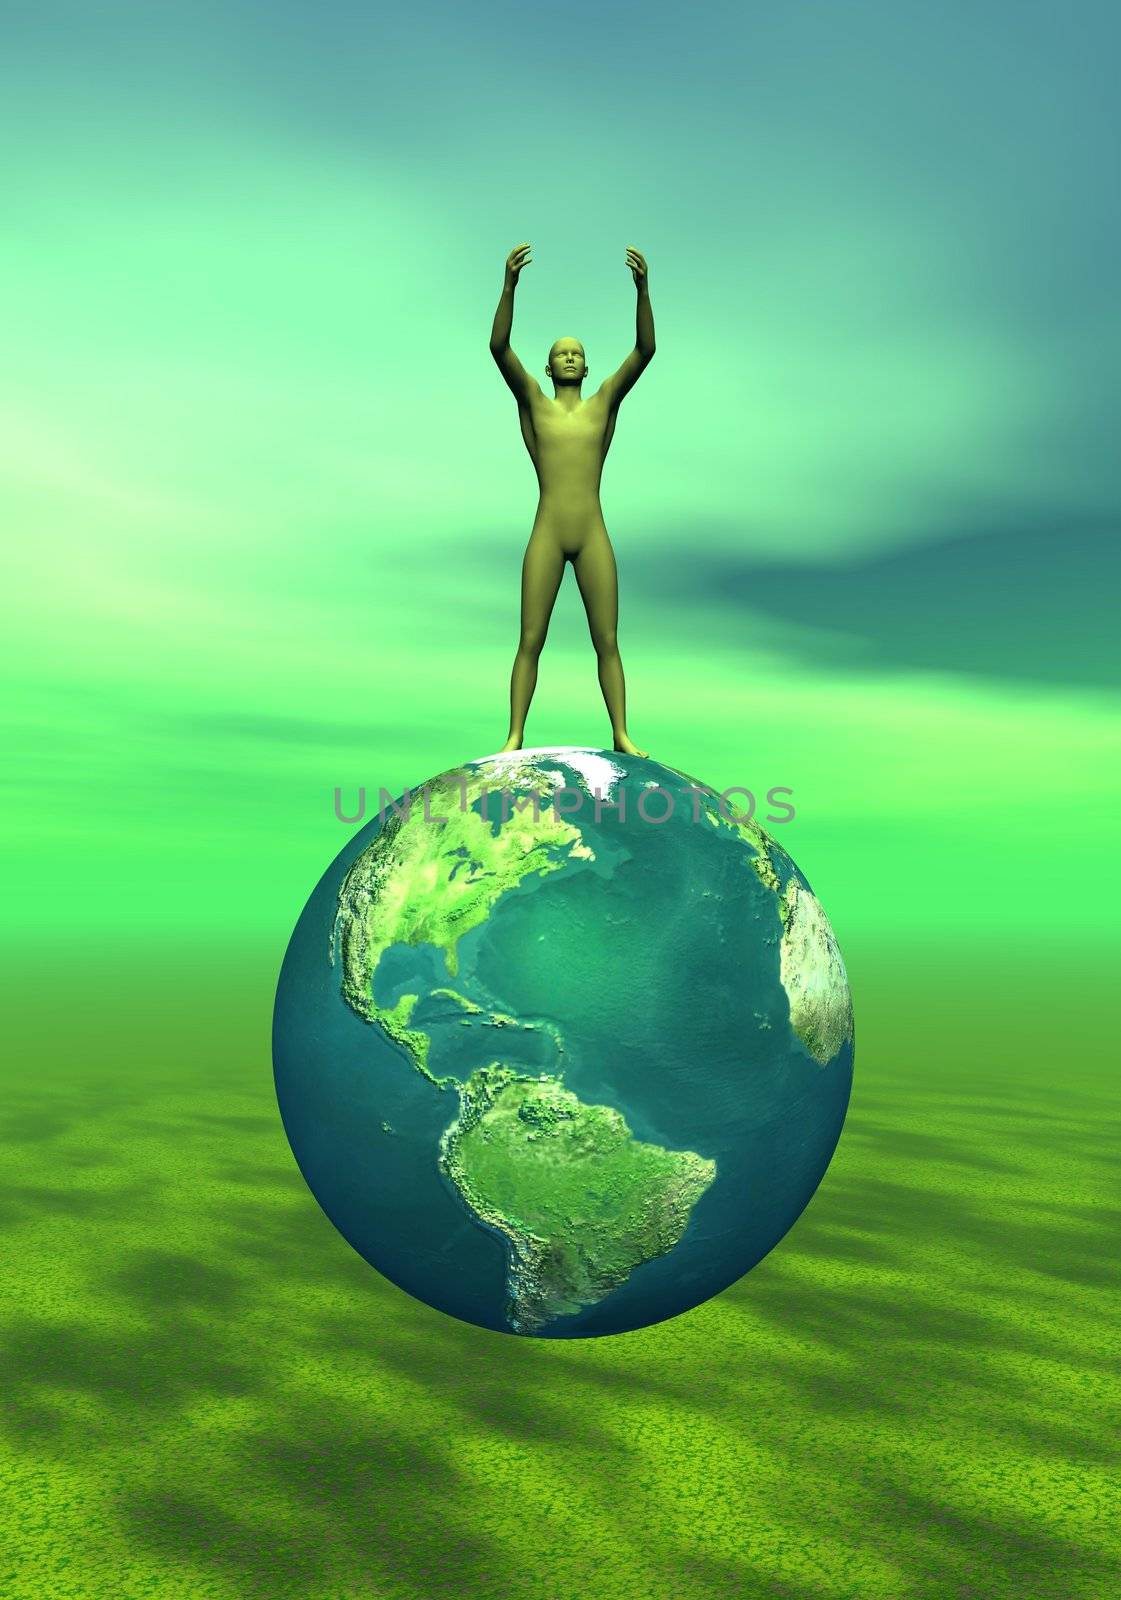 Human upon a green earth asking help to save the planet